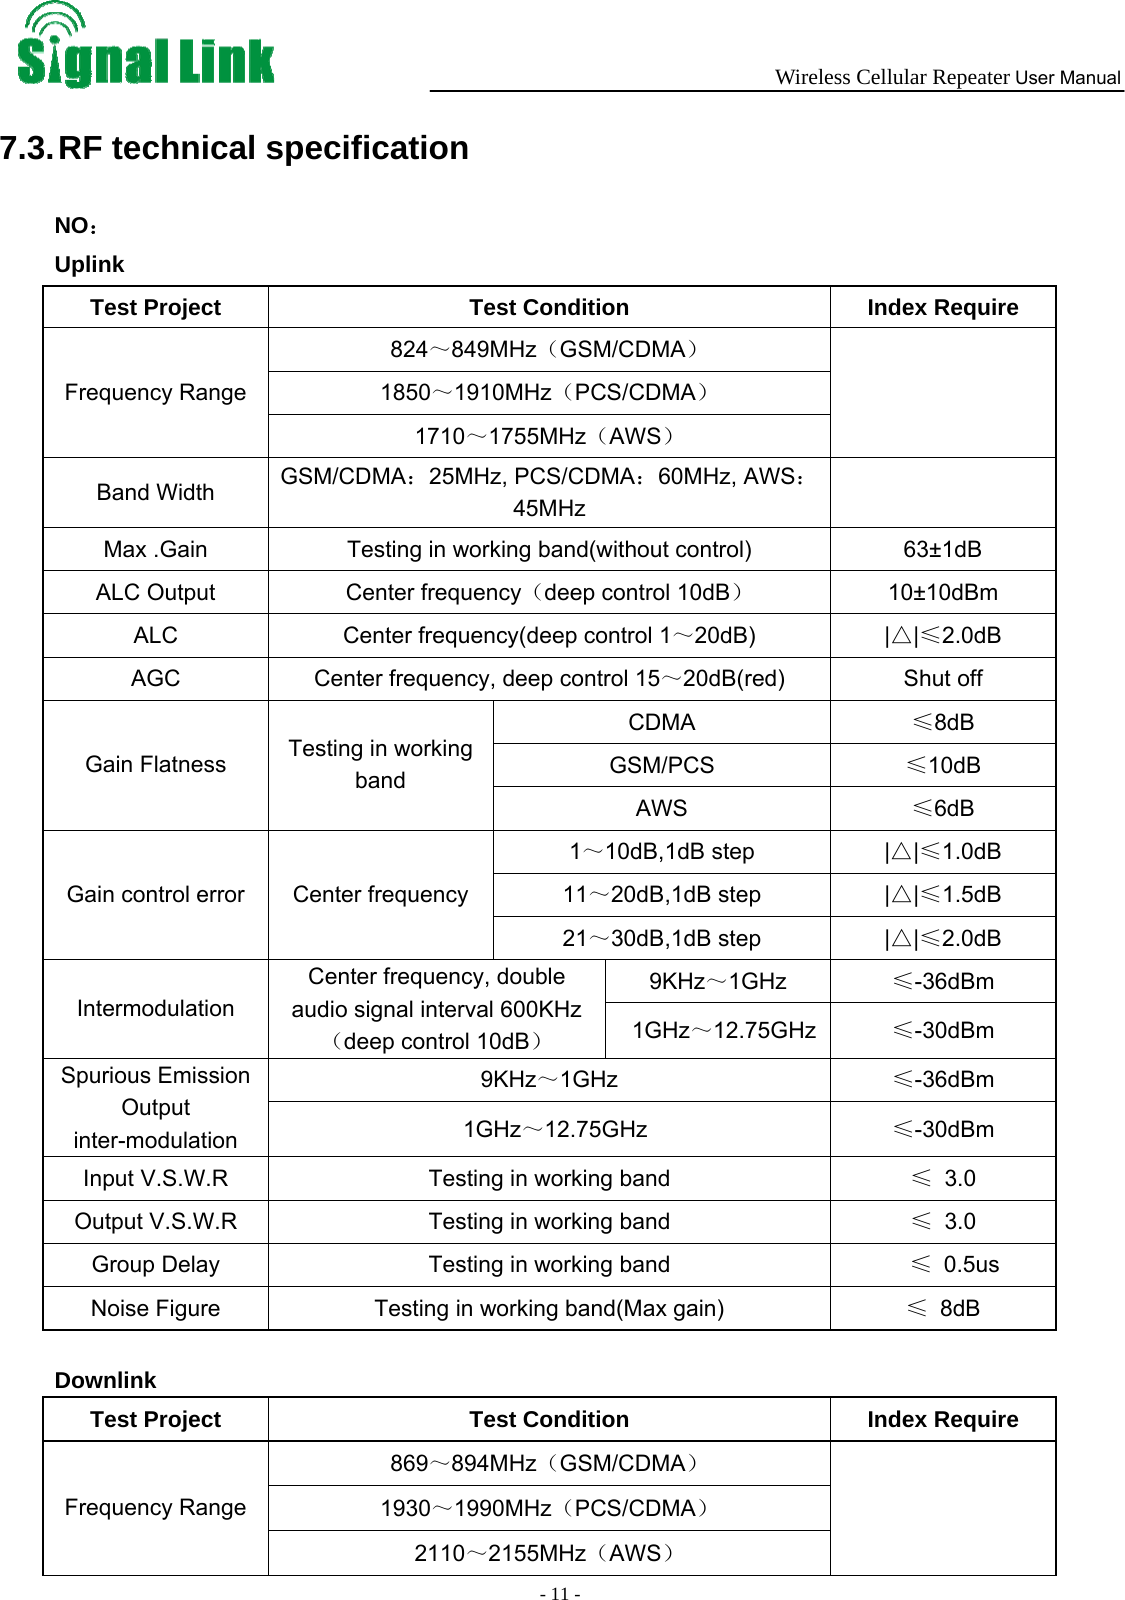  Wireless Cellular Repeater User Manual  - 11 -   7.3. RF technical specification NO： Uplink Test Project  Test Condition  Index Require 824～849MHz（GSM/CDMA） 1850～1910MHz（PCS/CDMA） Frequency Range 1710～1755MHz（AWS）   Band Width  GSM/CDMA：25MHz, PCS/CDMA：60MHz, AWS：45MHz    Max .Gain  Testing in working band(without control)  63±1dB ALC Output  Center frequency（deep control 10dB） 10±10dBm ALC  Center frequency(deep control 1～20dB) |△|≤2.0dB AGC  Center frequency, deep control 15～20dB(red) Shut off CDMA  ≤8dB GSM/PCS  ≤10dB Gain Flatness  Testing in working band AWS  ≤6dB 1～10dB,1dB step  |△|≤1.0dB 11～20dB,1dB step  |△|≤1.5dB Gain control error  Center frequency 21～30dB,1dB step  |△|≤2.0dB 9KHz～1GHz  ≤-36dBm Intermodulation Center frequency, double audio signal interval 600KHz（deep control 10dB）  1GHz～12.75GHz  ≤-30dBm 9KHz～1GHz  ≤-36dBm Spurious Emission Output inter-modulation   1GHz～12.75GHz  ≤-30dBm Input V.S.W.R  Testing in working band  ≤ 3.0 Output V.S.W.R  Testing in working band  ≤ 3.0 Group Delay  Testing in working band      ≤ 0.5us Noise Figure  Testing in working band(Max gain)  ≤ 8dB  Downlink Test Project  Test Condition  Index Require 869～894MHz（GSM/CDMA） 1930～1990MHz（PCS/CDMA） Frequency Range 2110～2155MHz（AWS）   